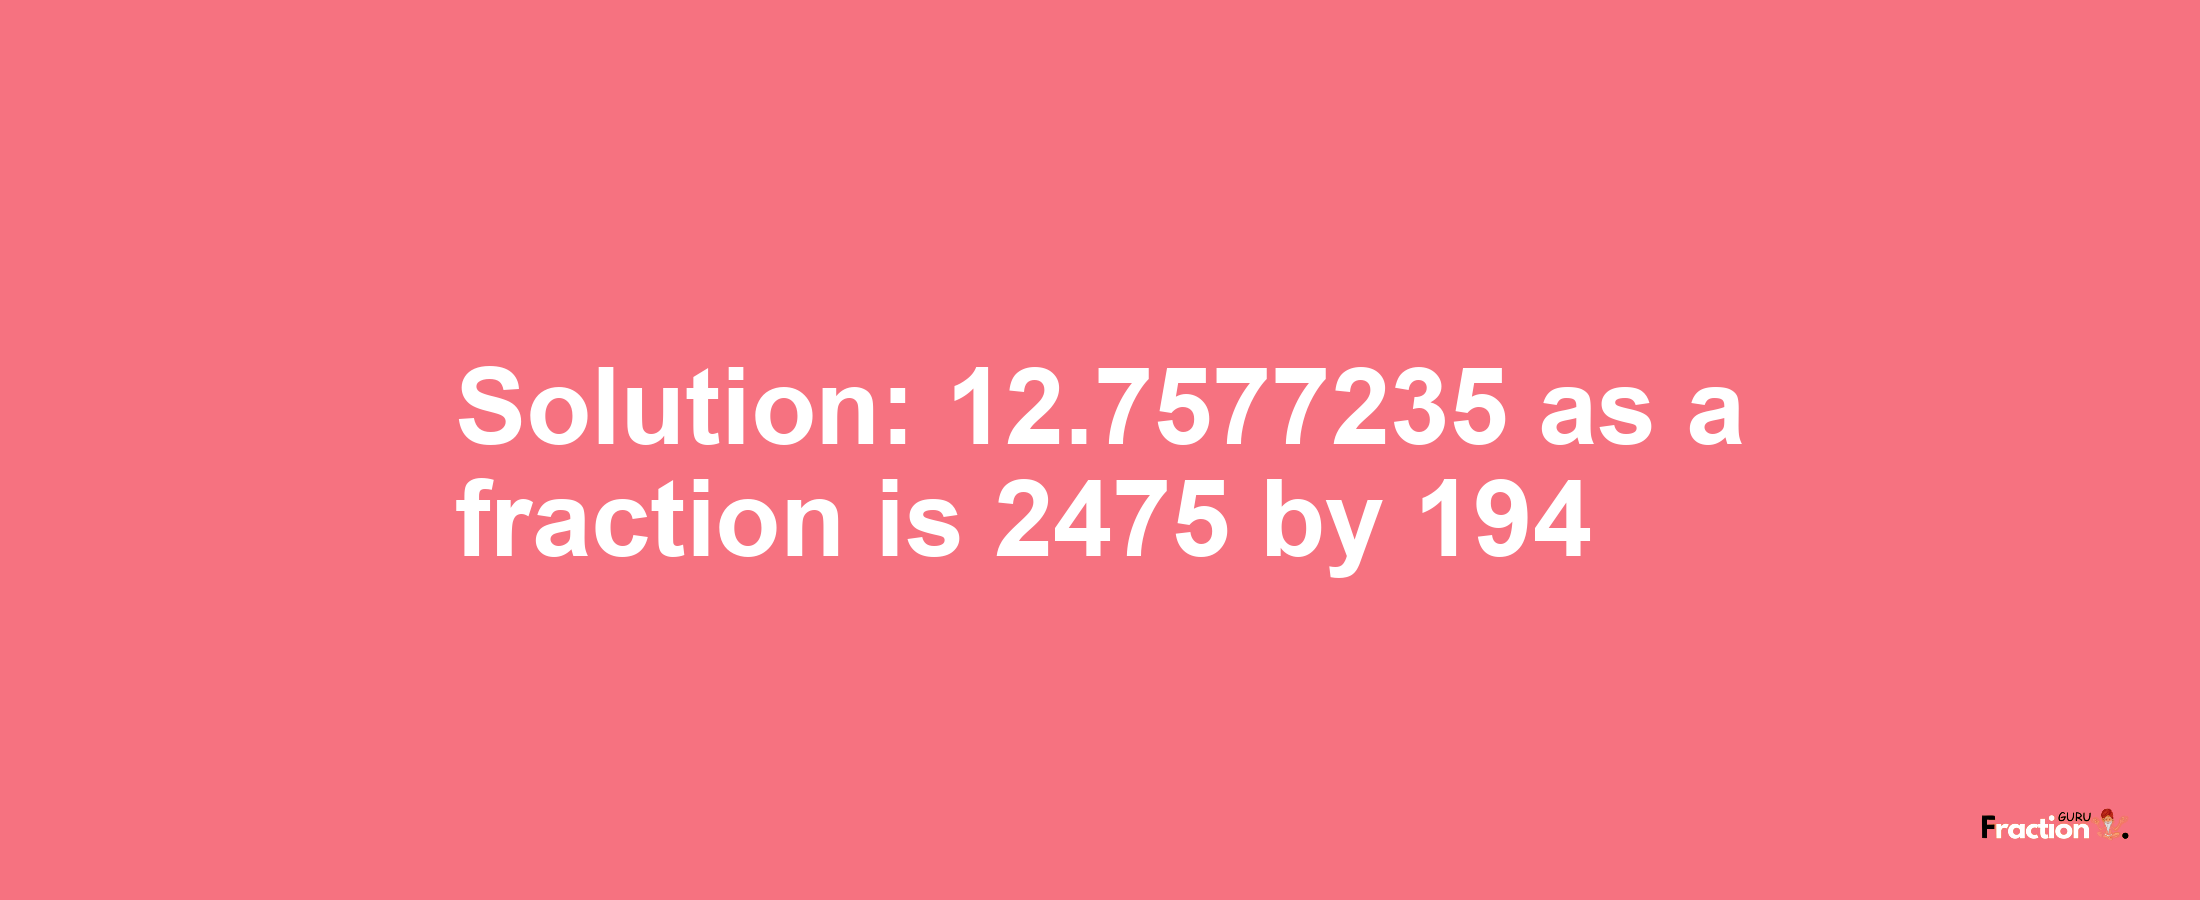 Solution:12.7577235 as a fraction is 2475/194